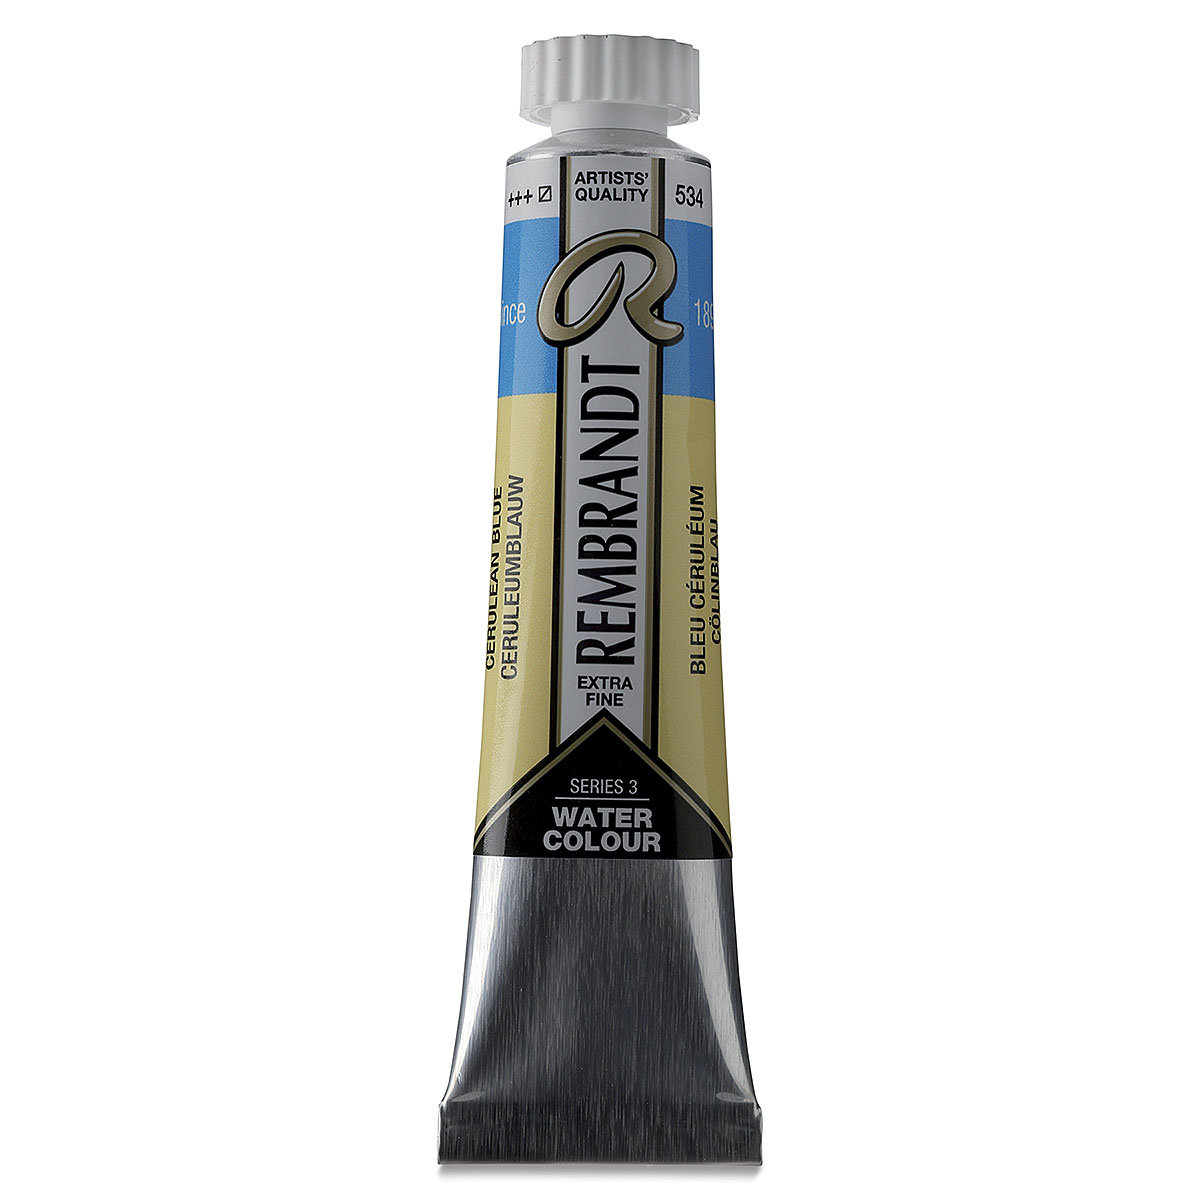 Rembrandt Artists' Watercolor, Spark Blue 20ml Tube